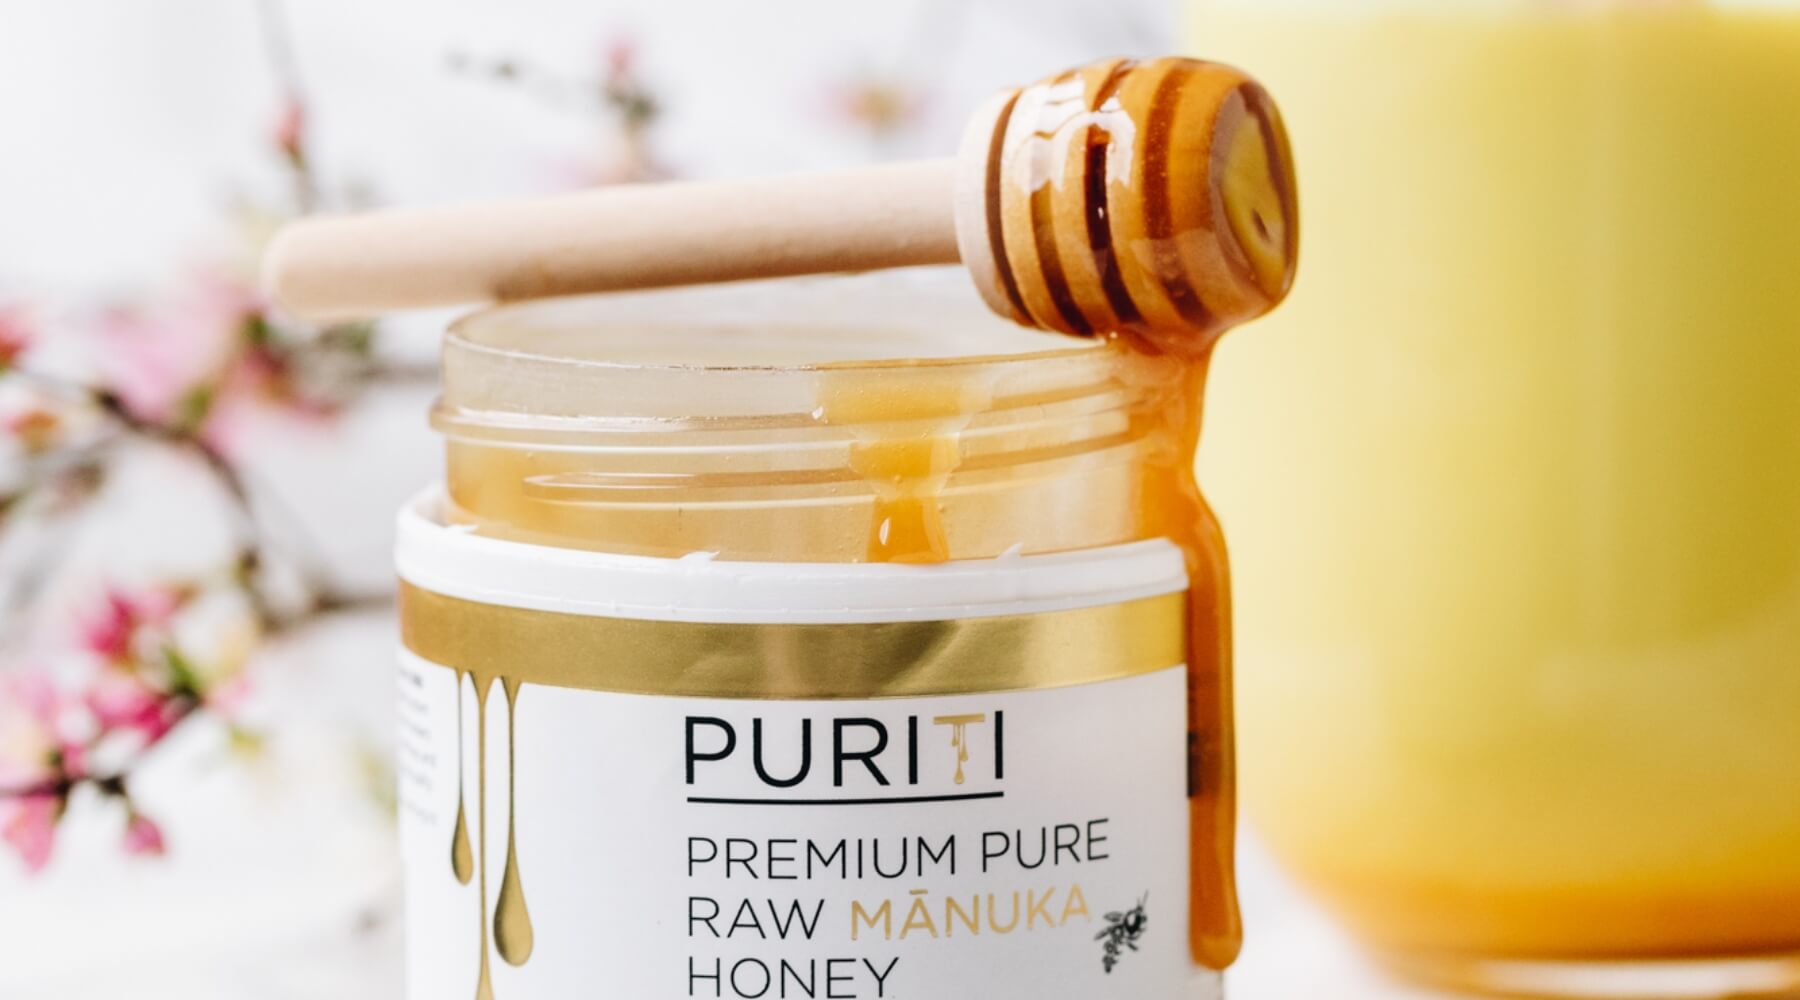 What Is So Special About Manuka Honey? - PURITI